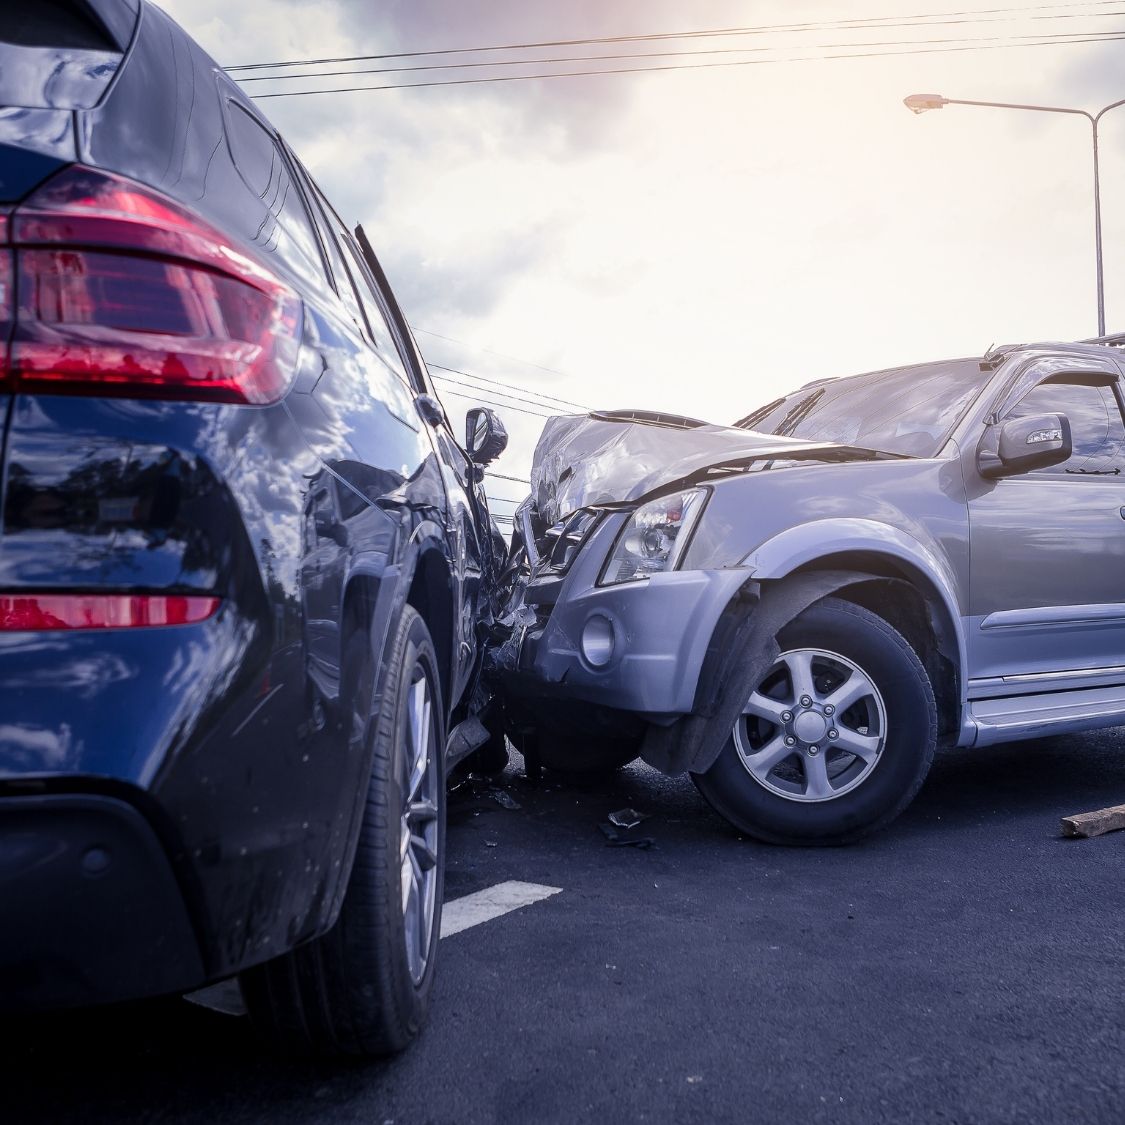 Best Ways To Recoup After Being Hit in an Auto Accident